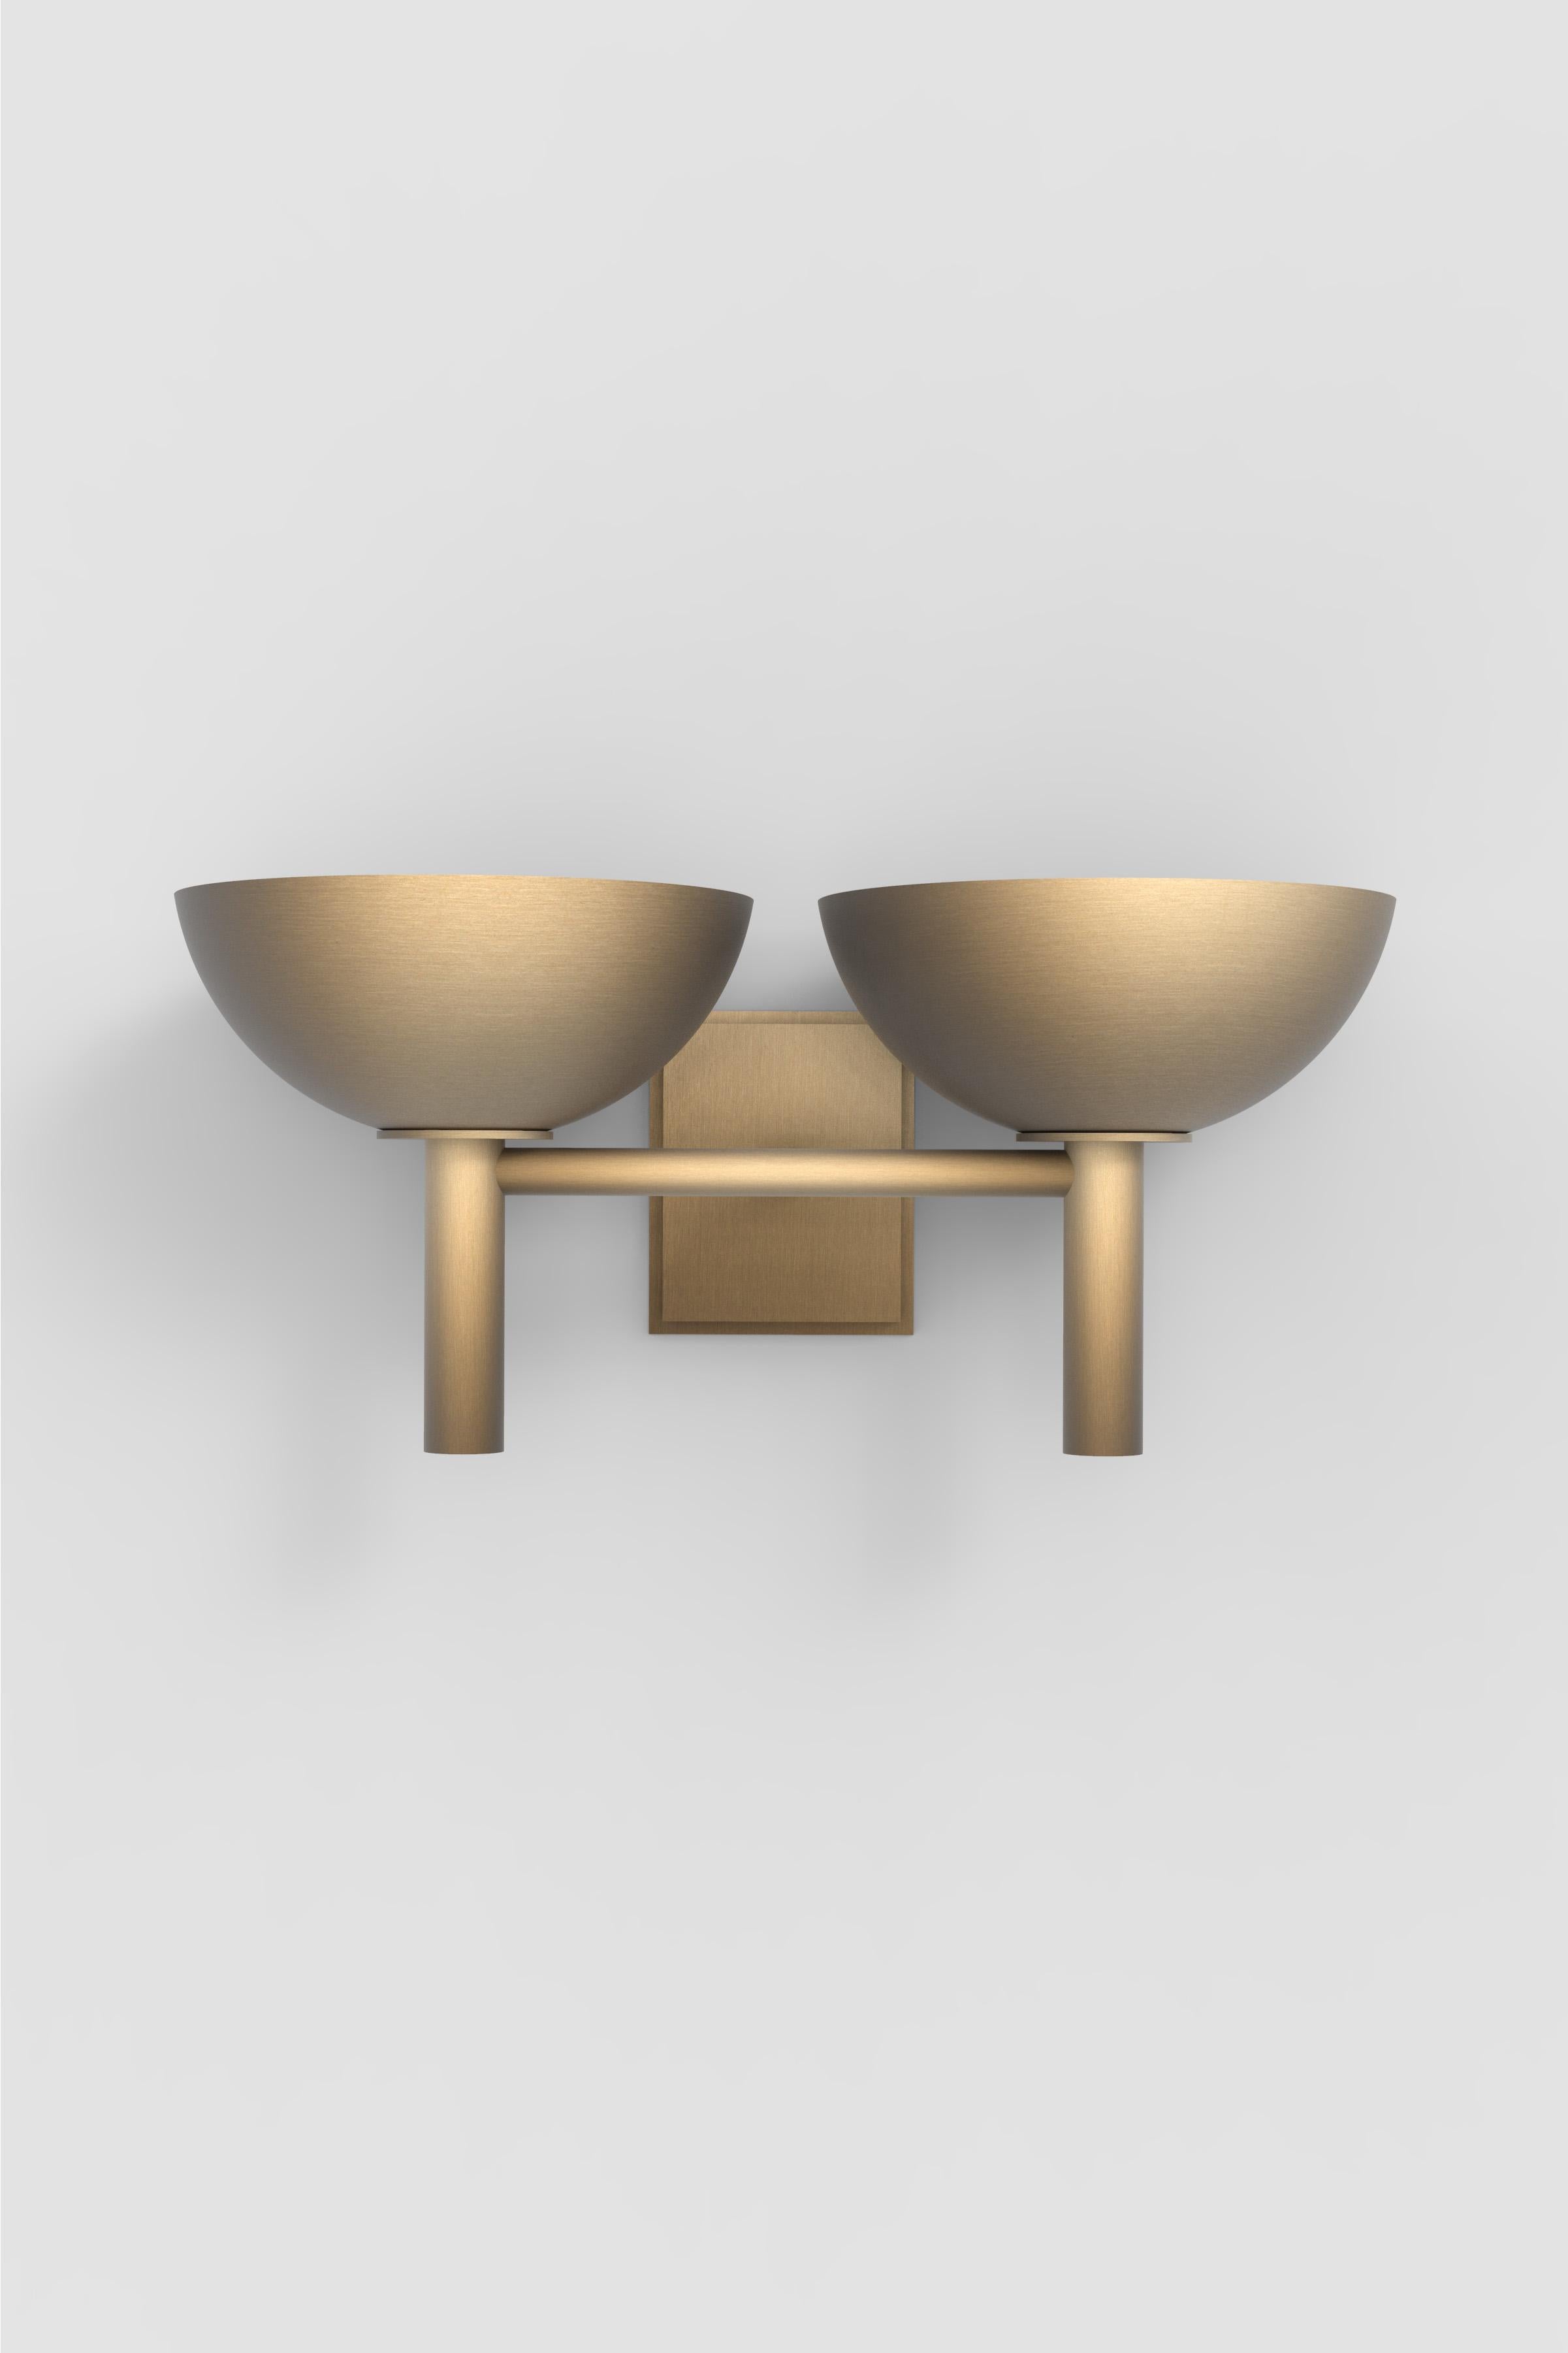 Orphan Work 200 Double Sconce BB
Shown in brushed brass
Available in brushed brass and blackened brass
Measures: 8.625” H x 20” W x 9.75” D
UL approved
Holds (2) 60W candelabra bulbs
LED bulb recommended
Uplight with downlight by request

Orphan